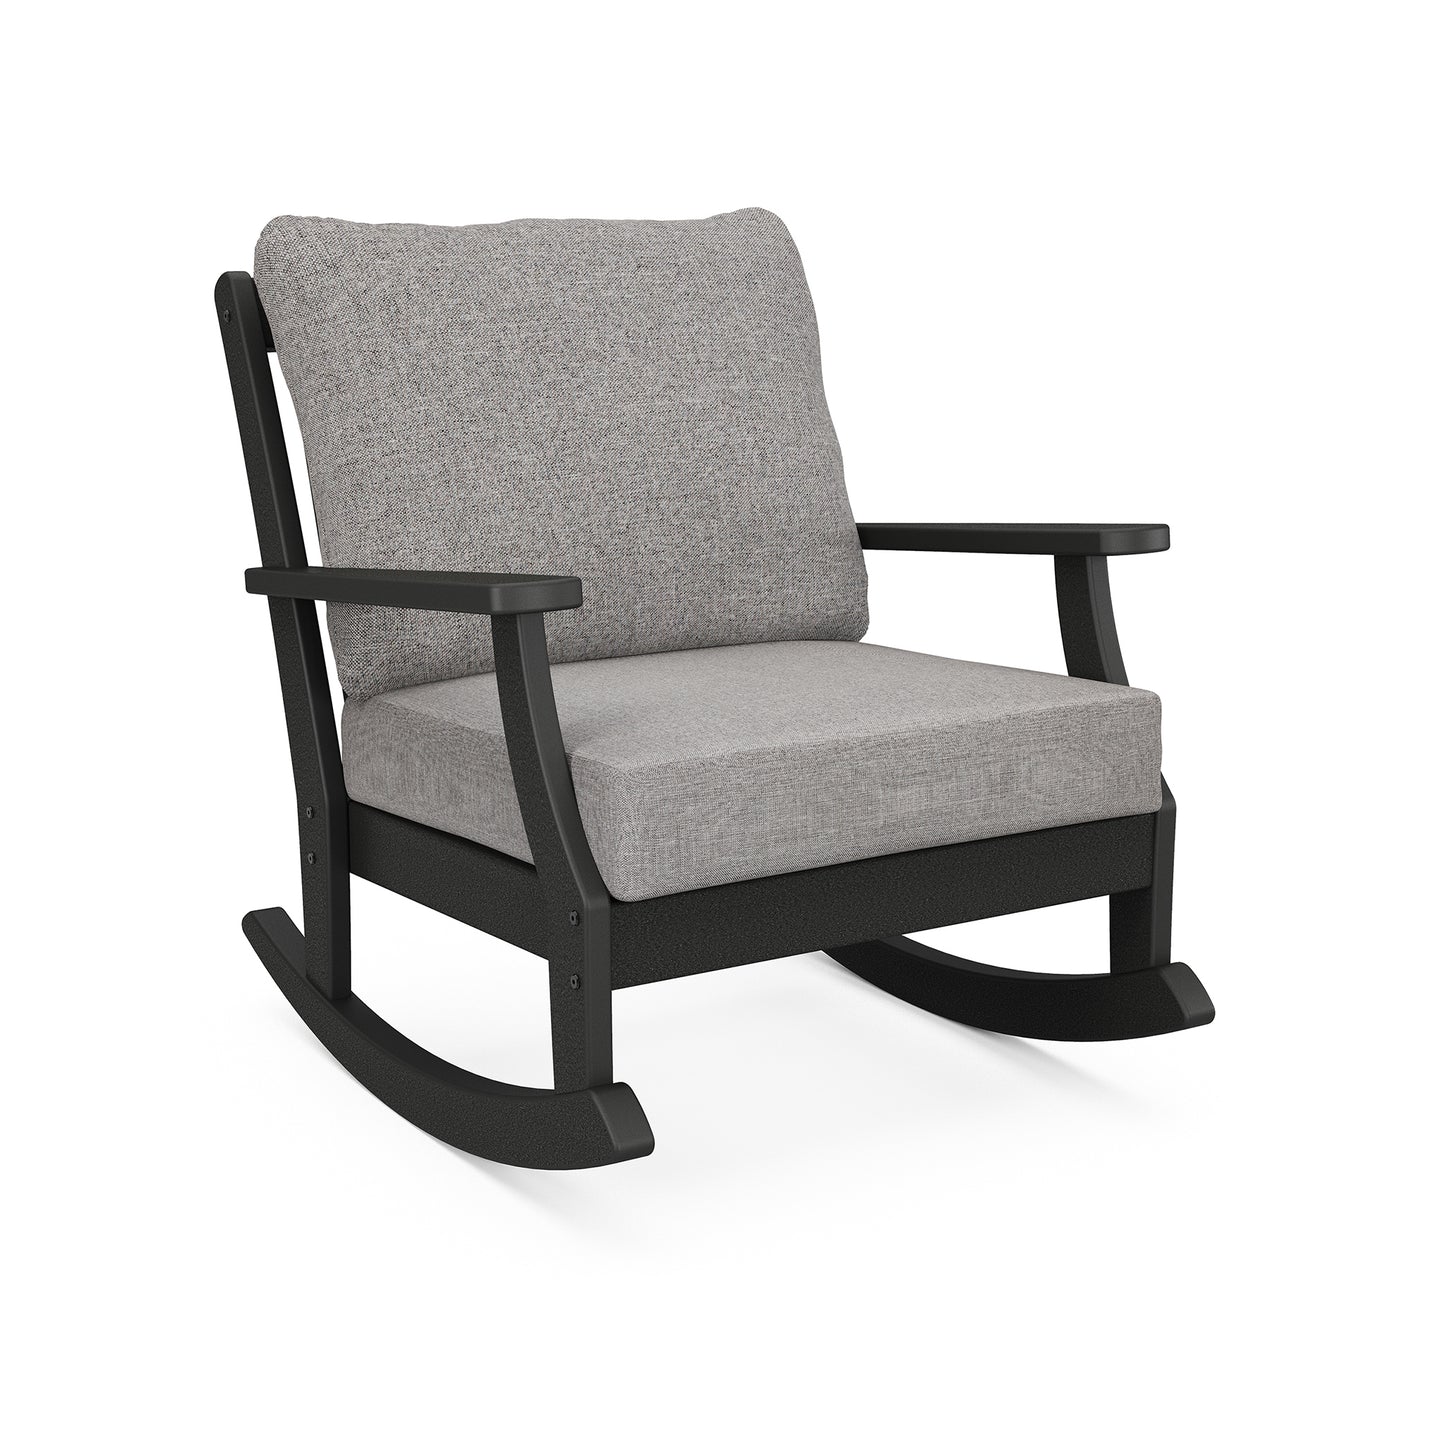 An image of a modern POLYWOOD® Braxton Deep Seating Rocking Chair with a sleek black frame and light gray cushions on a plain white background.